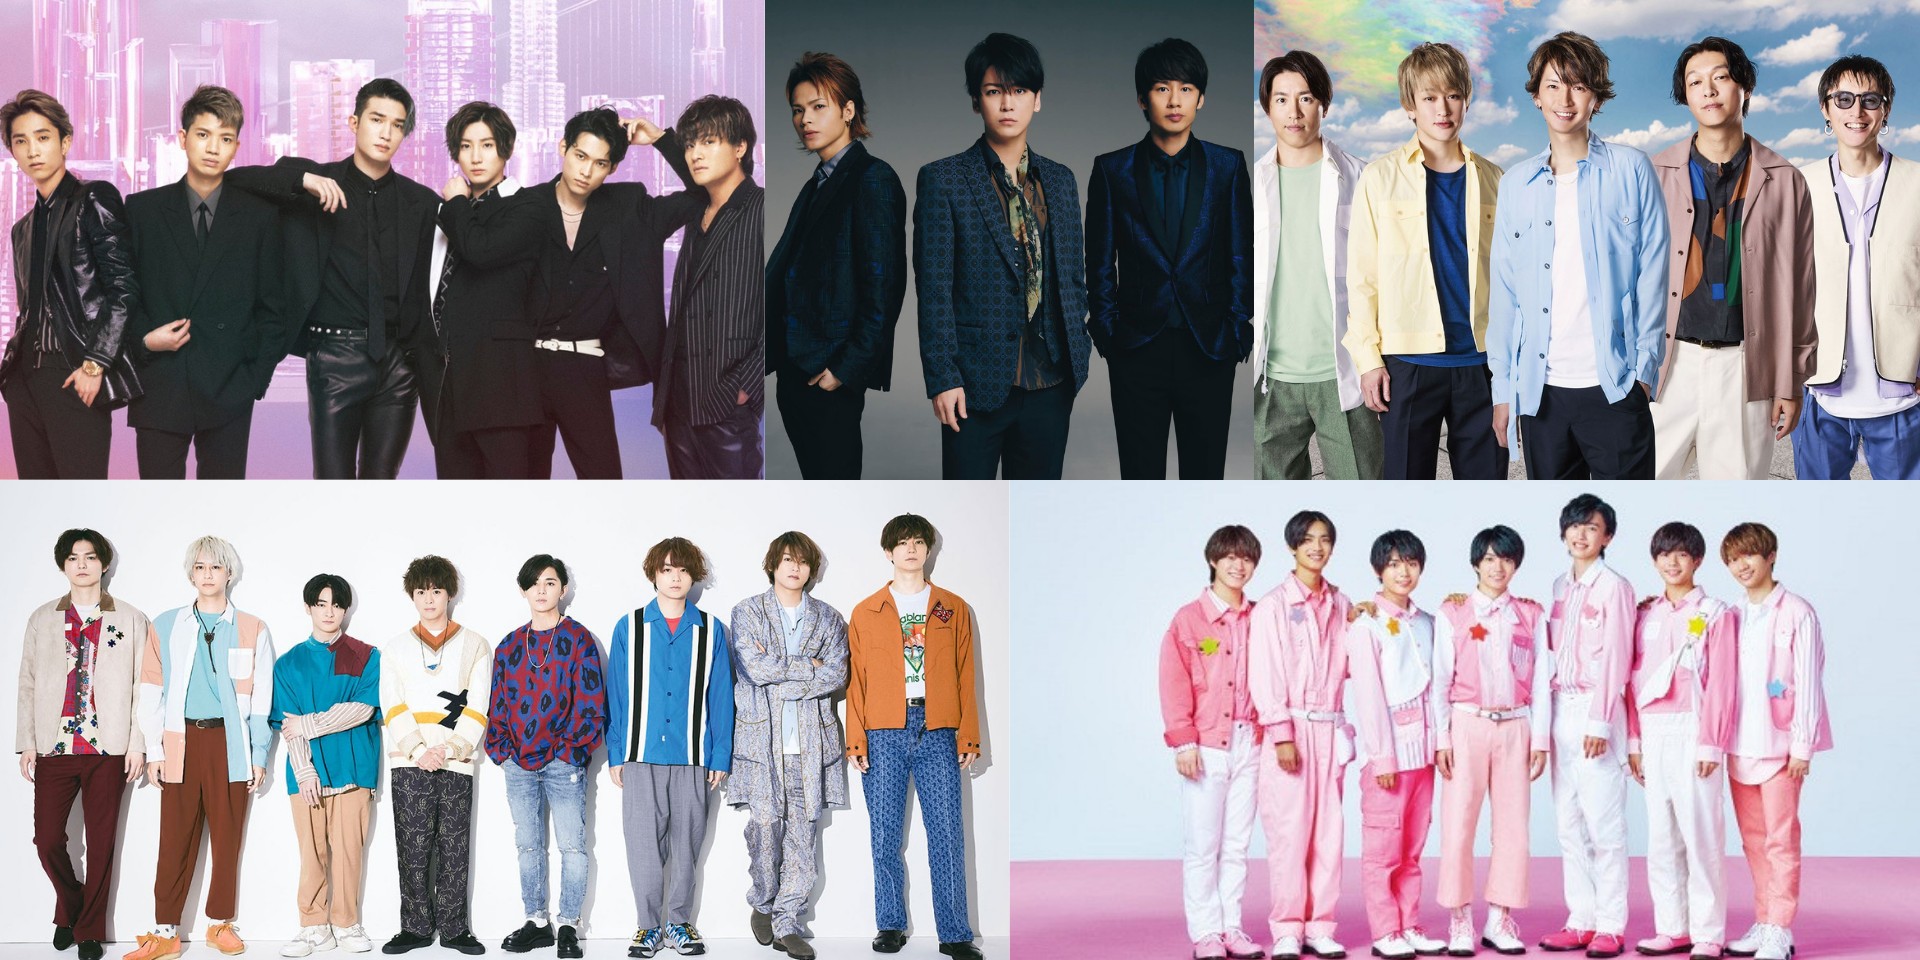 Here's how to watch 'Johnny's Festival' featuring Naniwa Danshi,